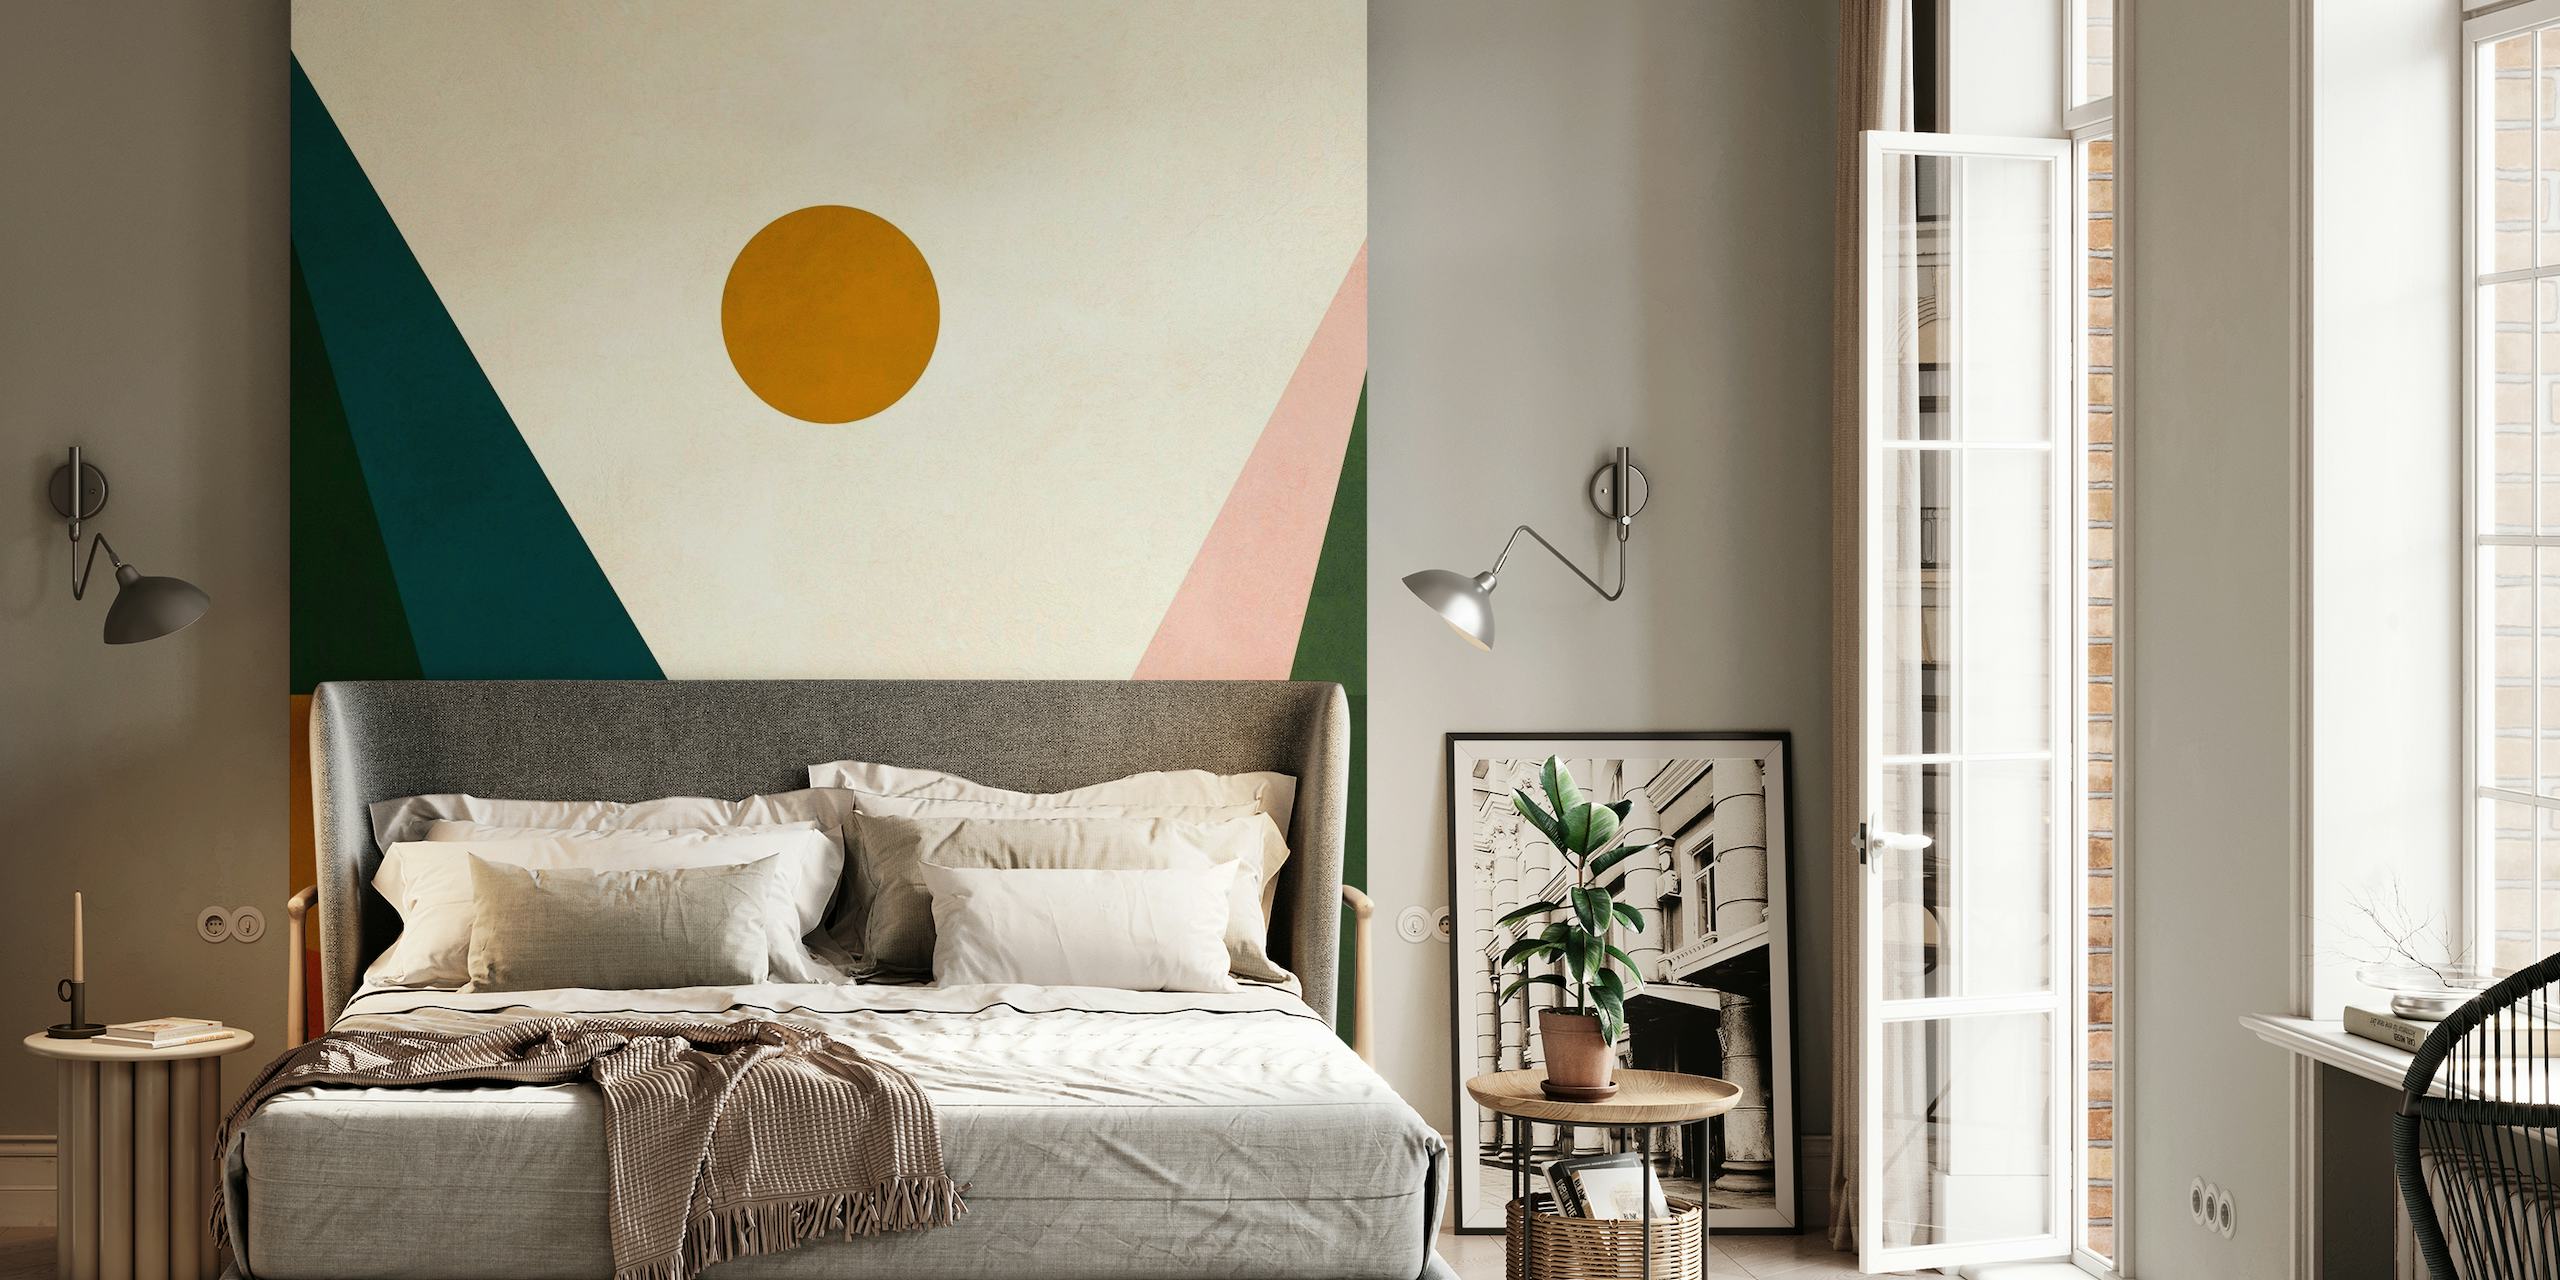 Abstract geometric watercolor wall mural with earthy greens, warm oranges, and cool blues with a central golden circle